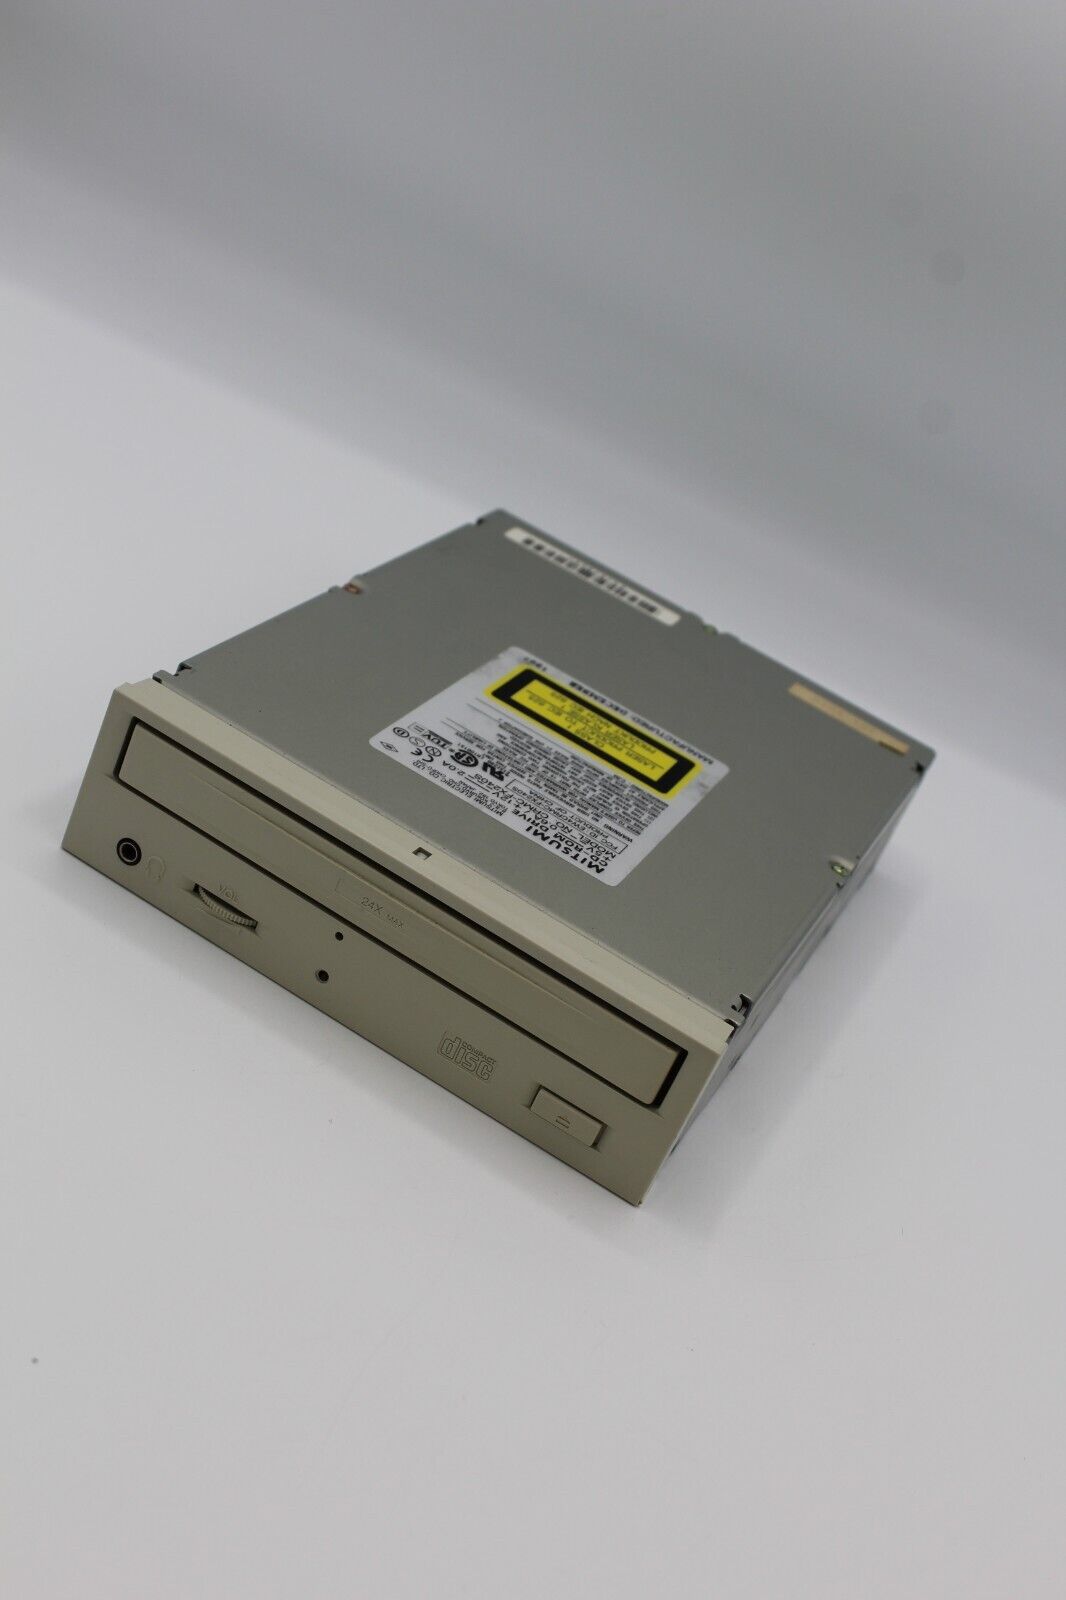 Vintage Mitsumi CD-ROM Drive Model CRMC-FX240S untested and sold as is 1997 Used